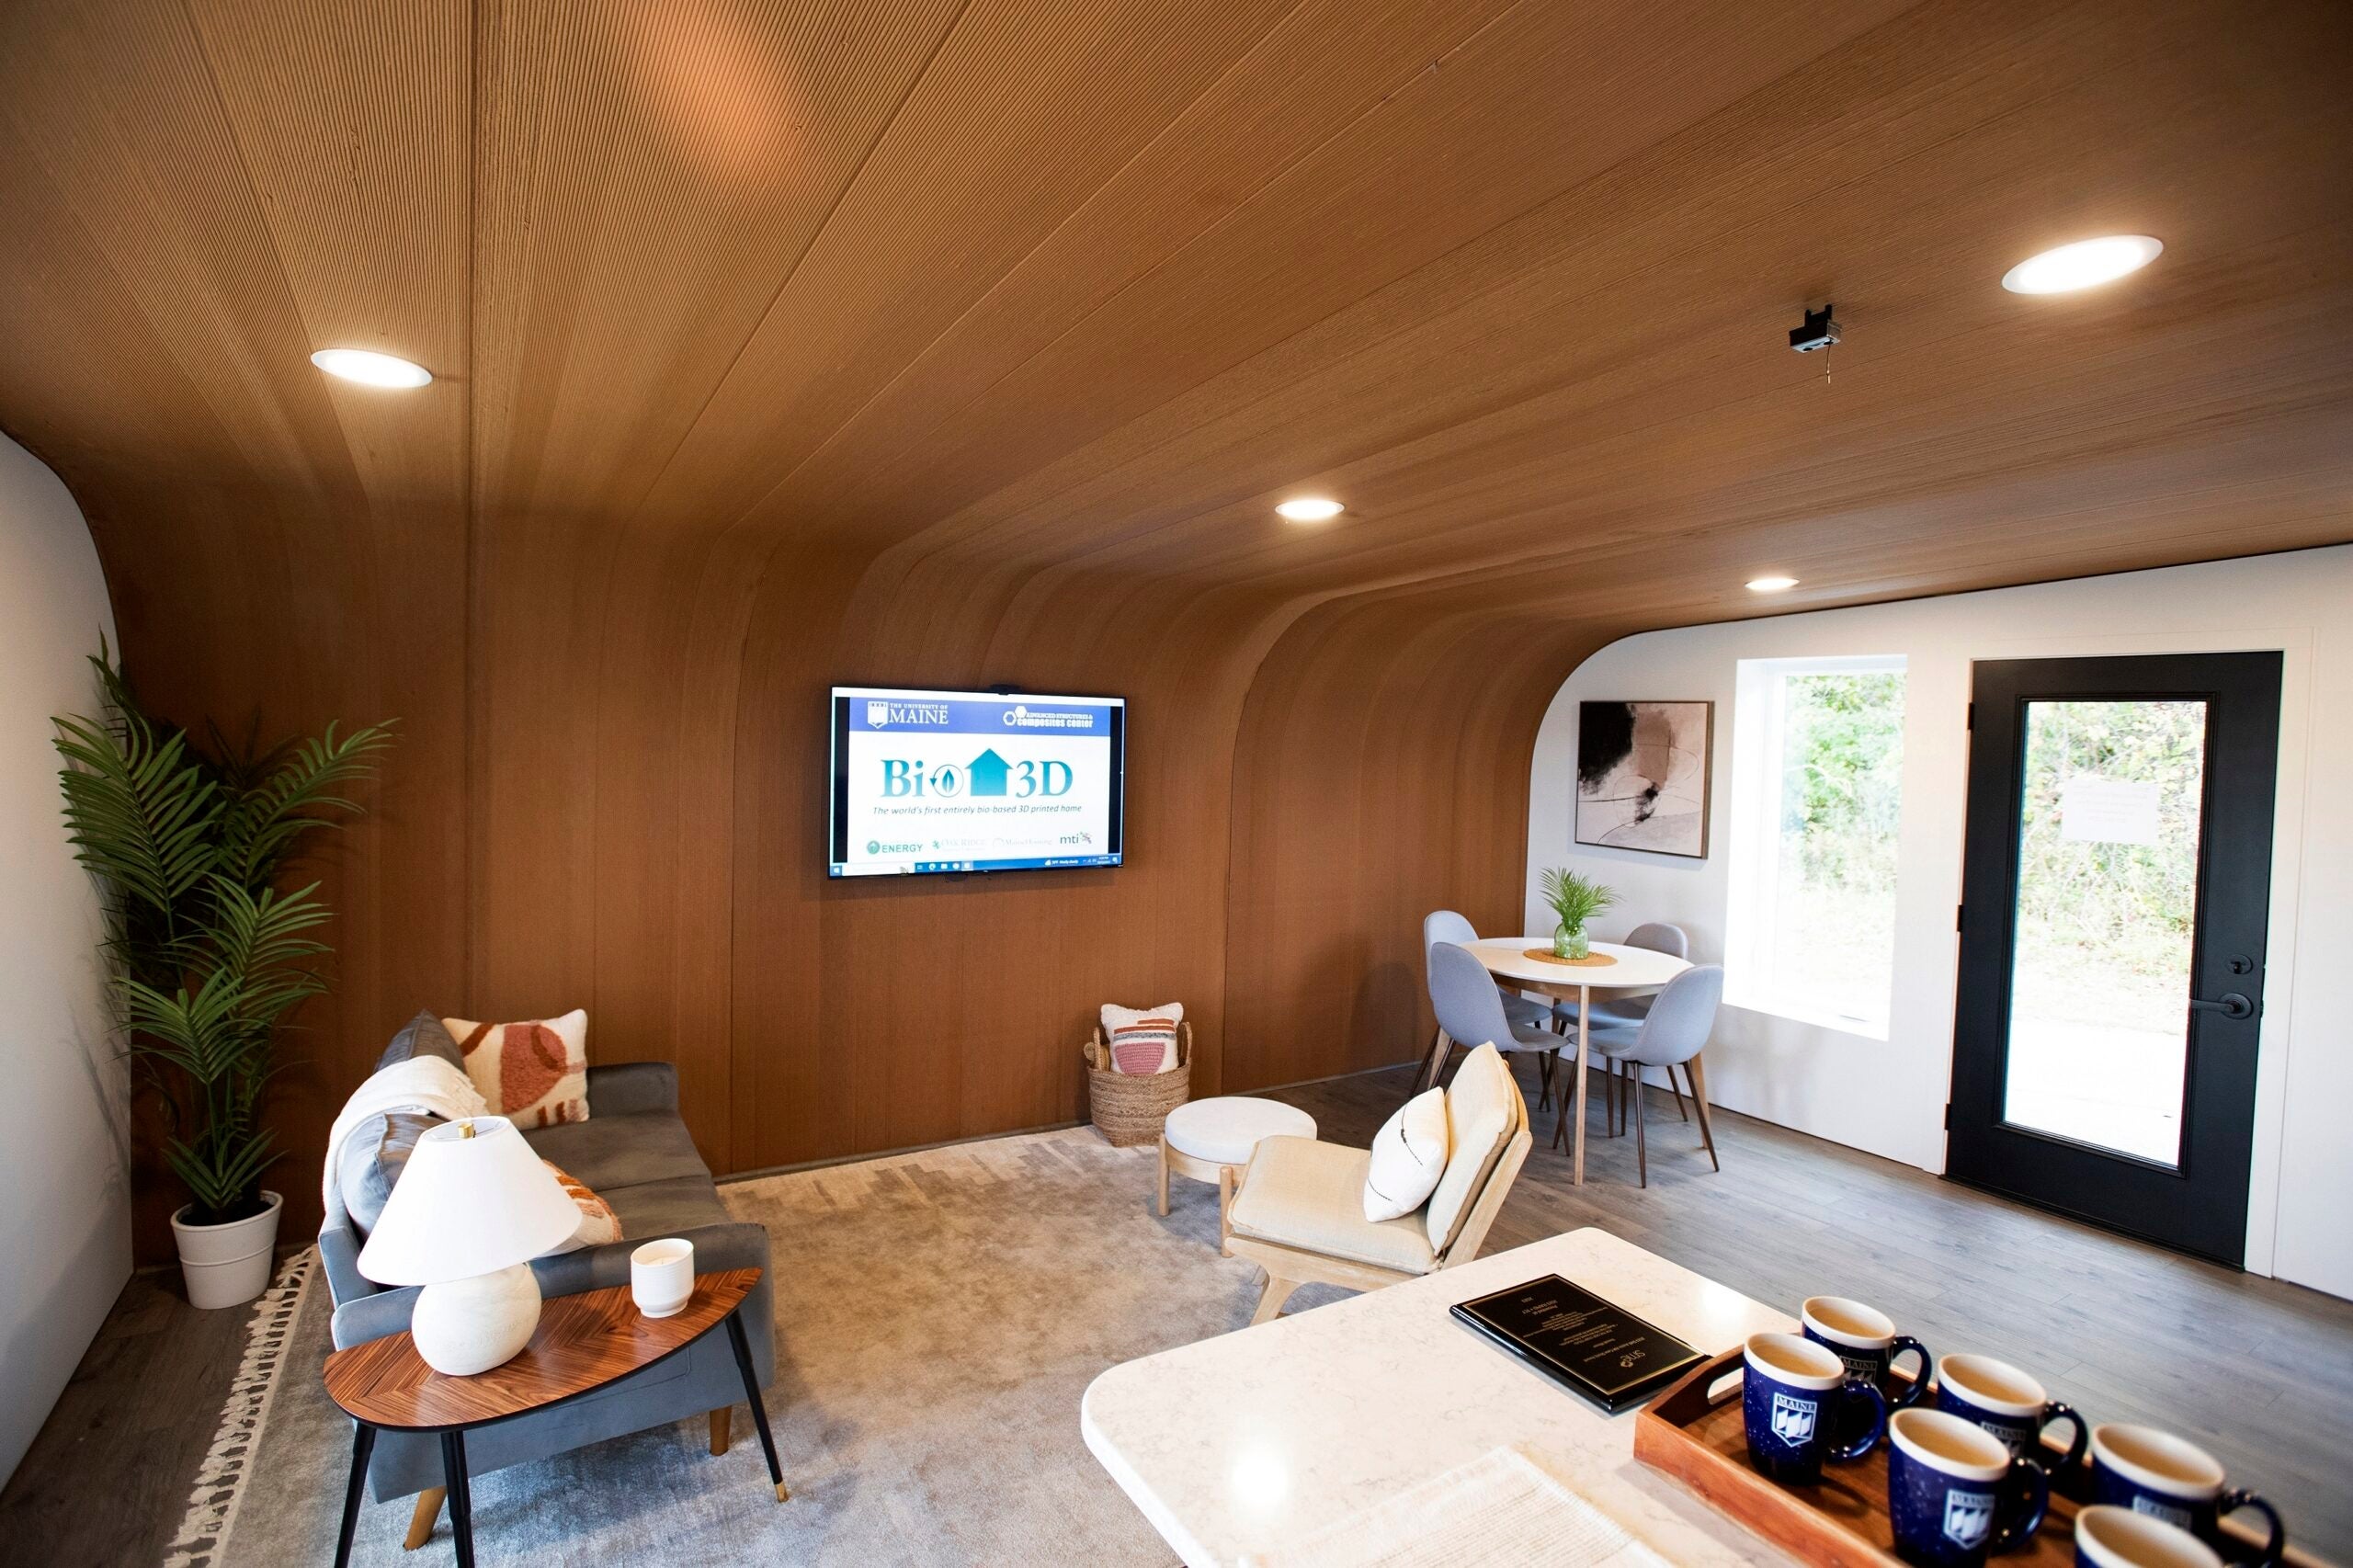 The inside of the University of Maine's first 3D printed home. 